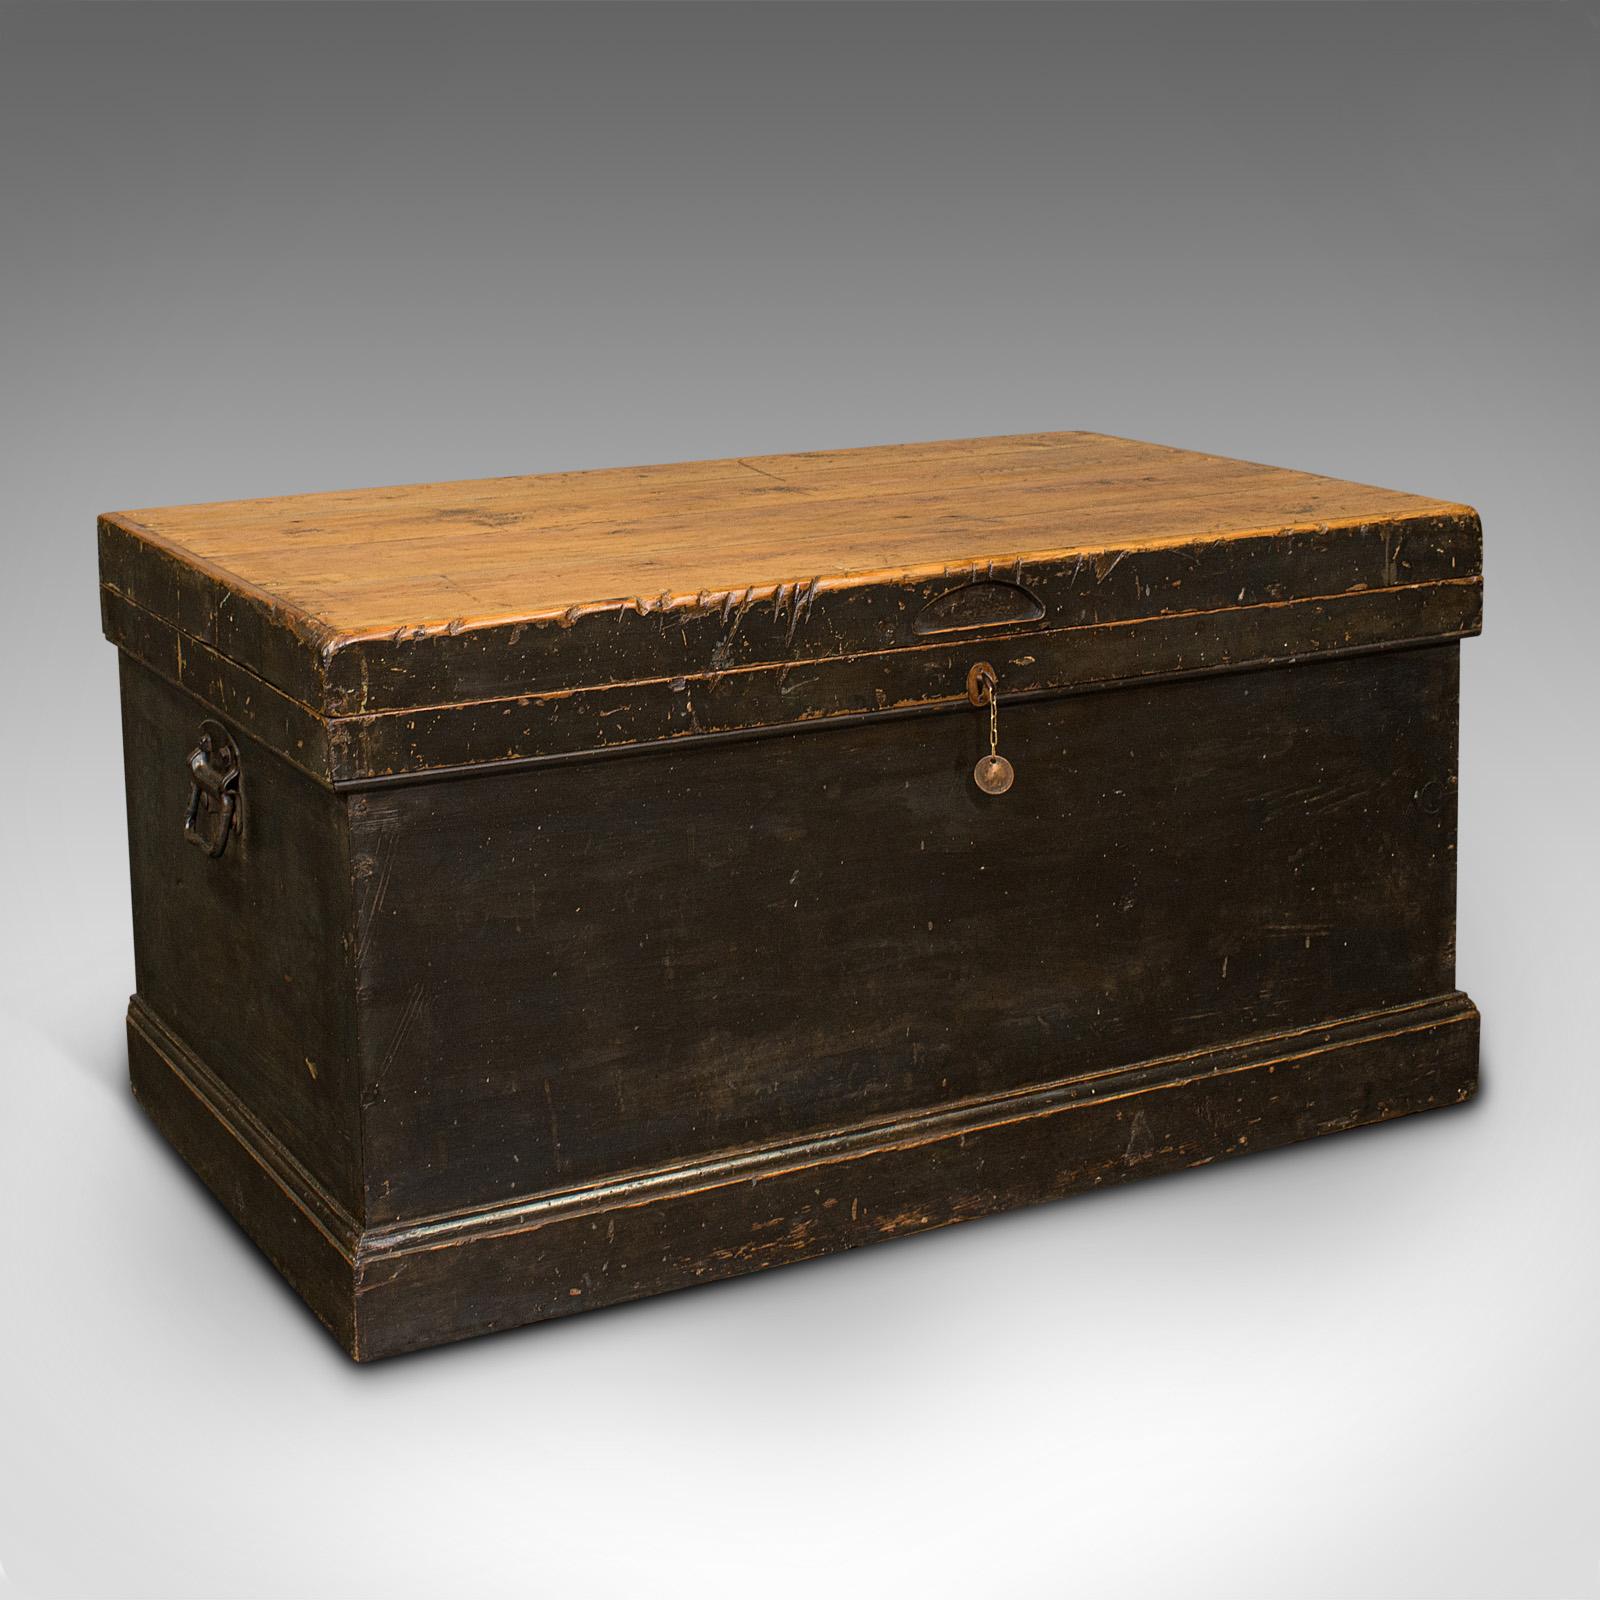 This is an antique shipwright's chest. An English, ebonised pine craftsman's tool trunk, dating to the late Victorian period, circa 1900.

Pleasingly aged maritime chest with useful interior
Displays a desirable aged patina throughout
Ebonised